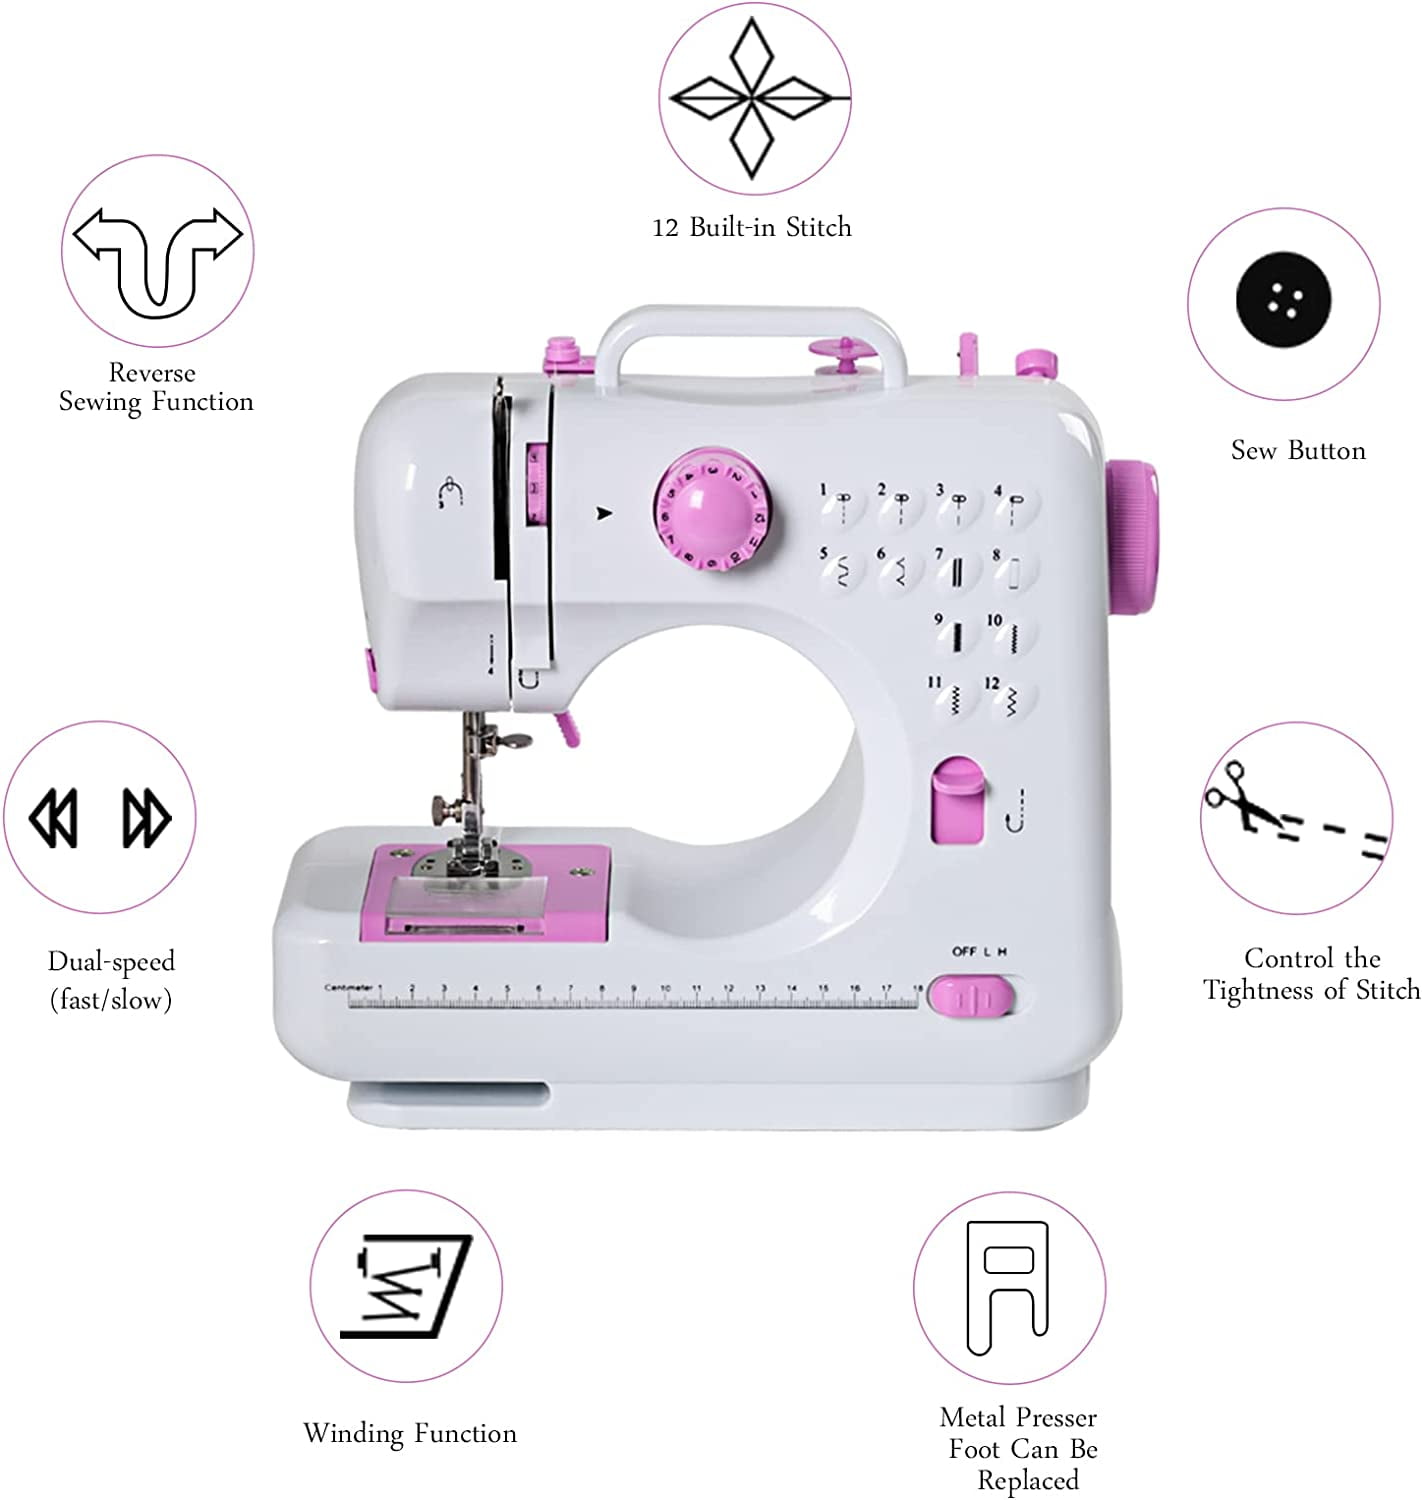 NEX™ Cute Pink Modern Crafting Sewing Machine with 12 Built-In Stitches